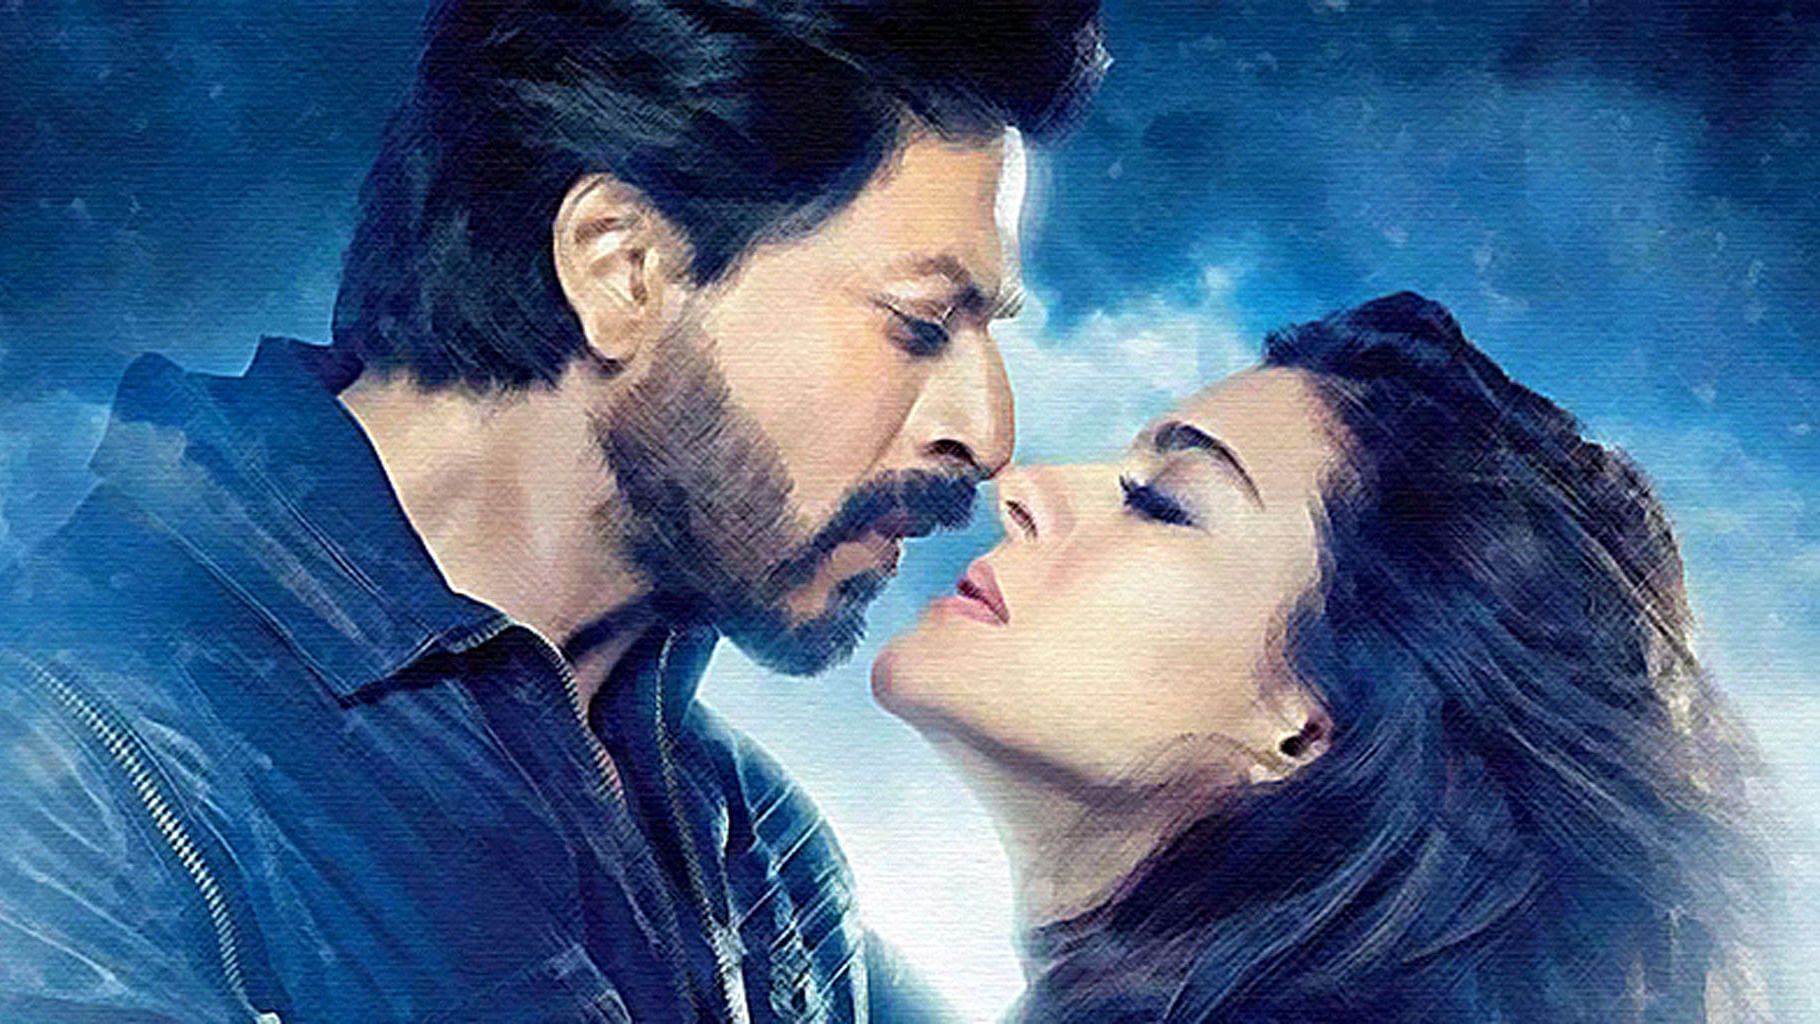 The SRK-Kajol jodi is running out of ‘nostalgic’ love (Photo: Promotional still from <i>Dilwale</i>; altered by The Quint)